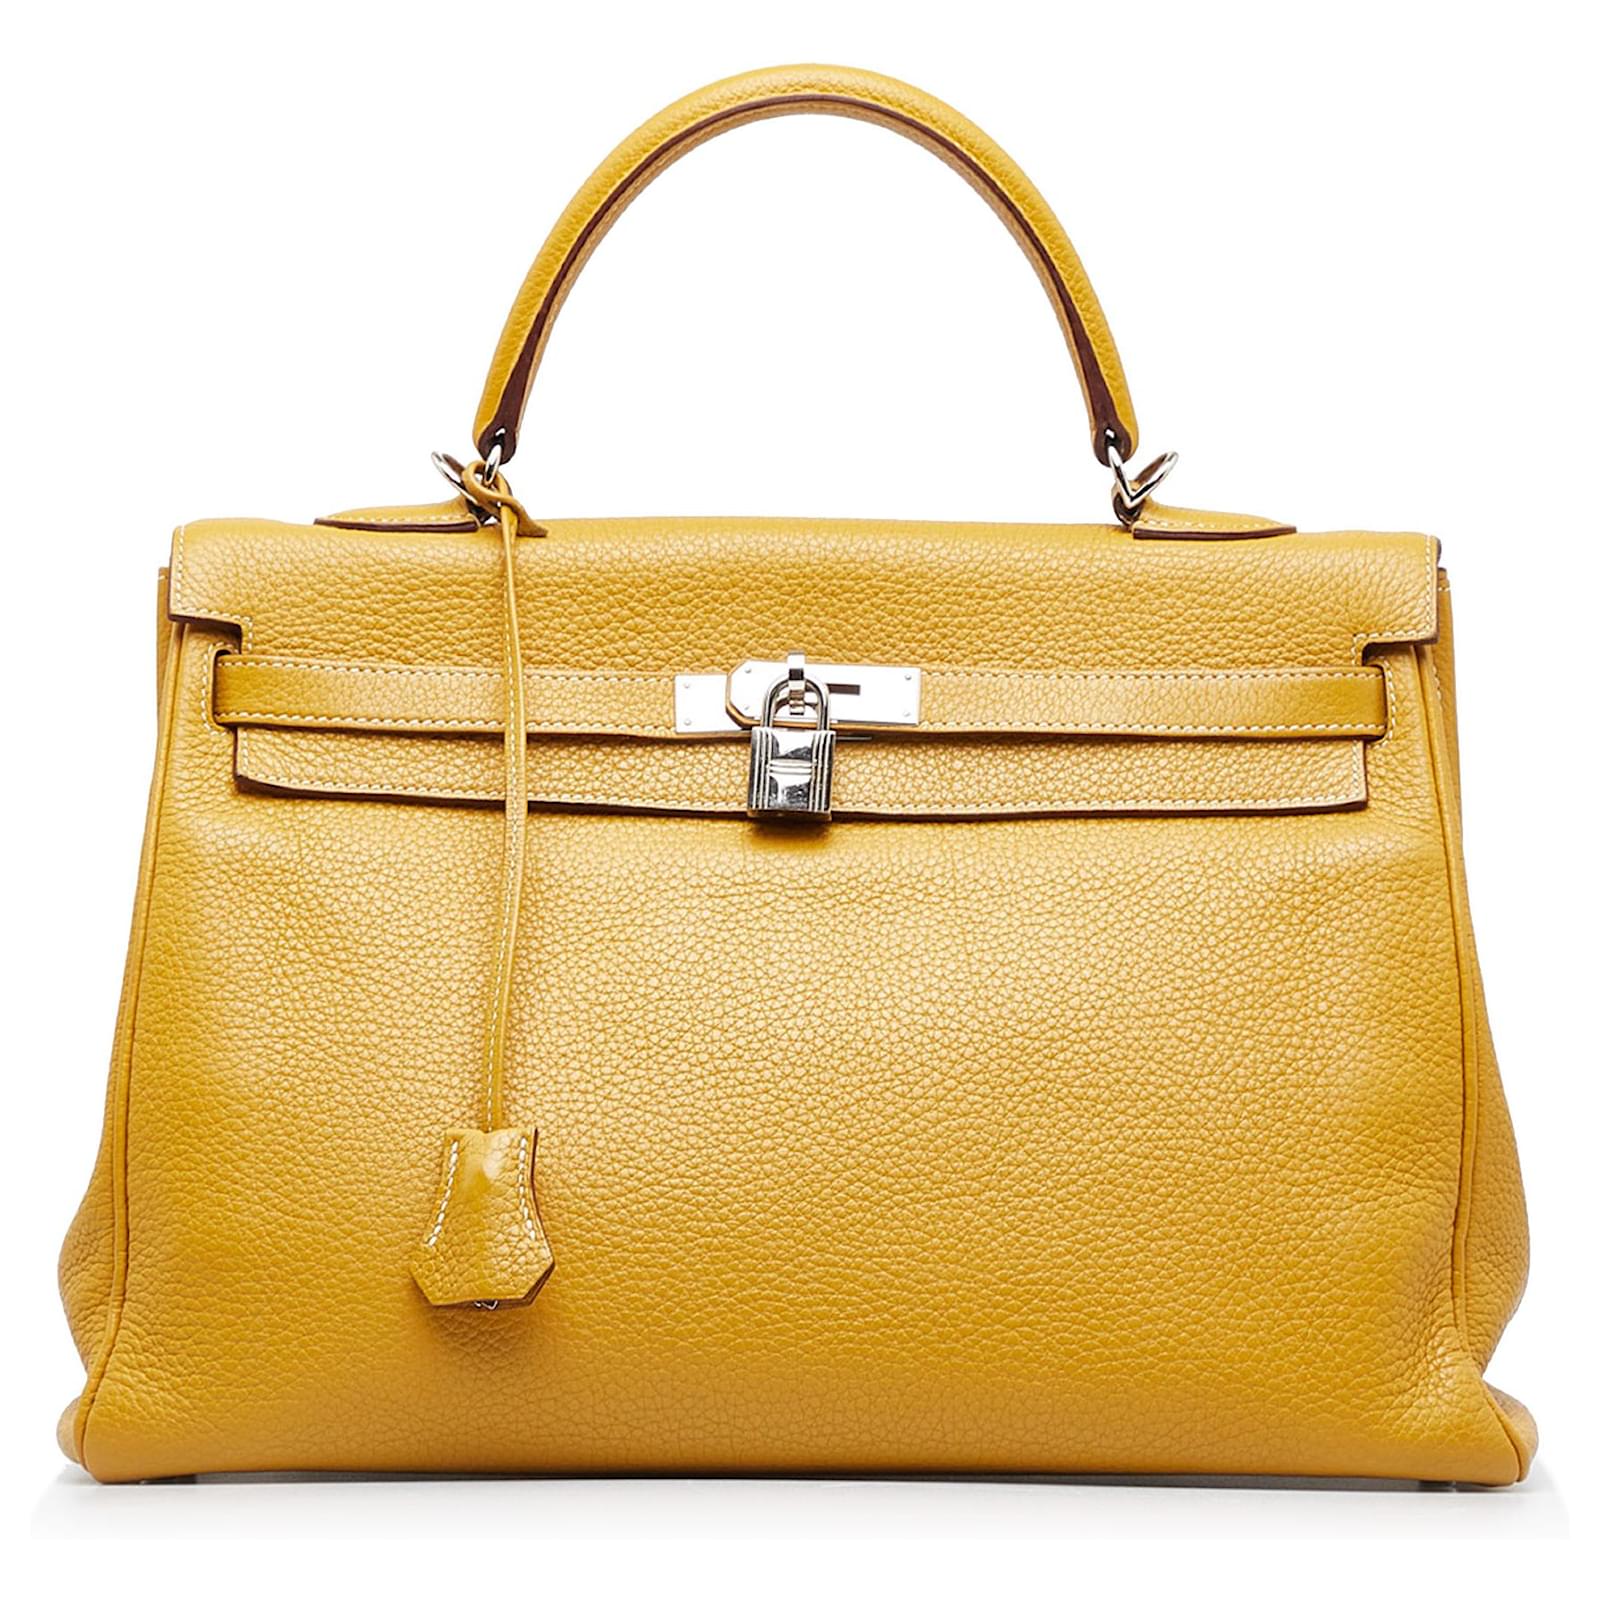 Hermes Birkin 35 Soufre GHW Gold 2013 New Color-Lime yellow- kelly